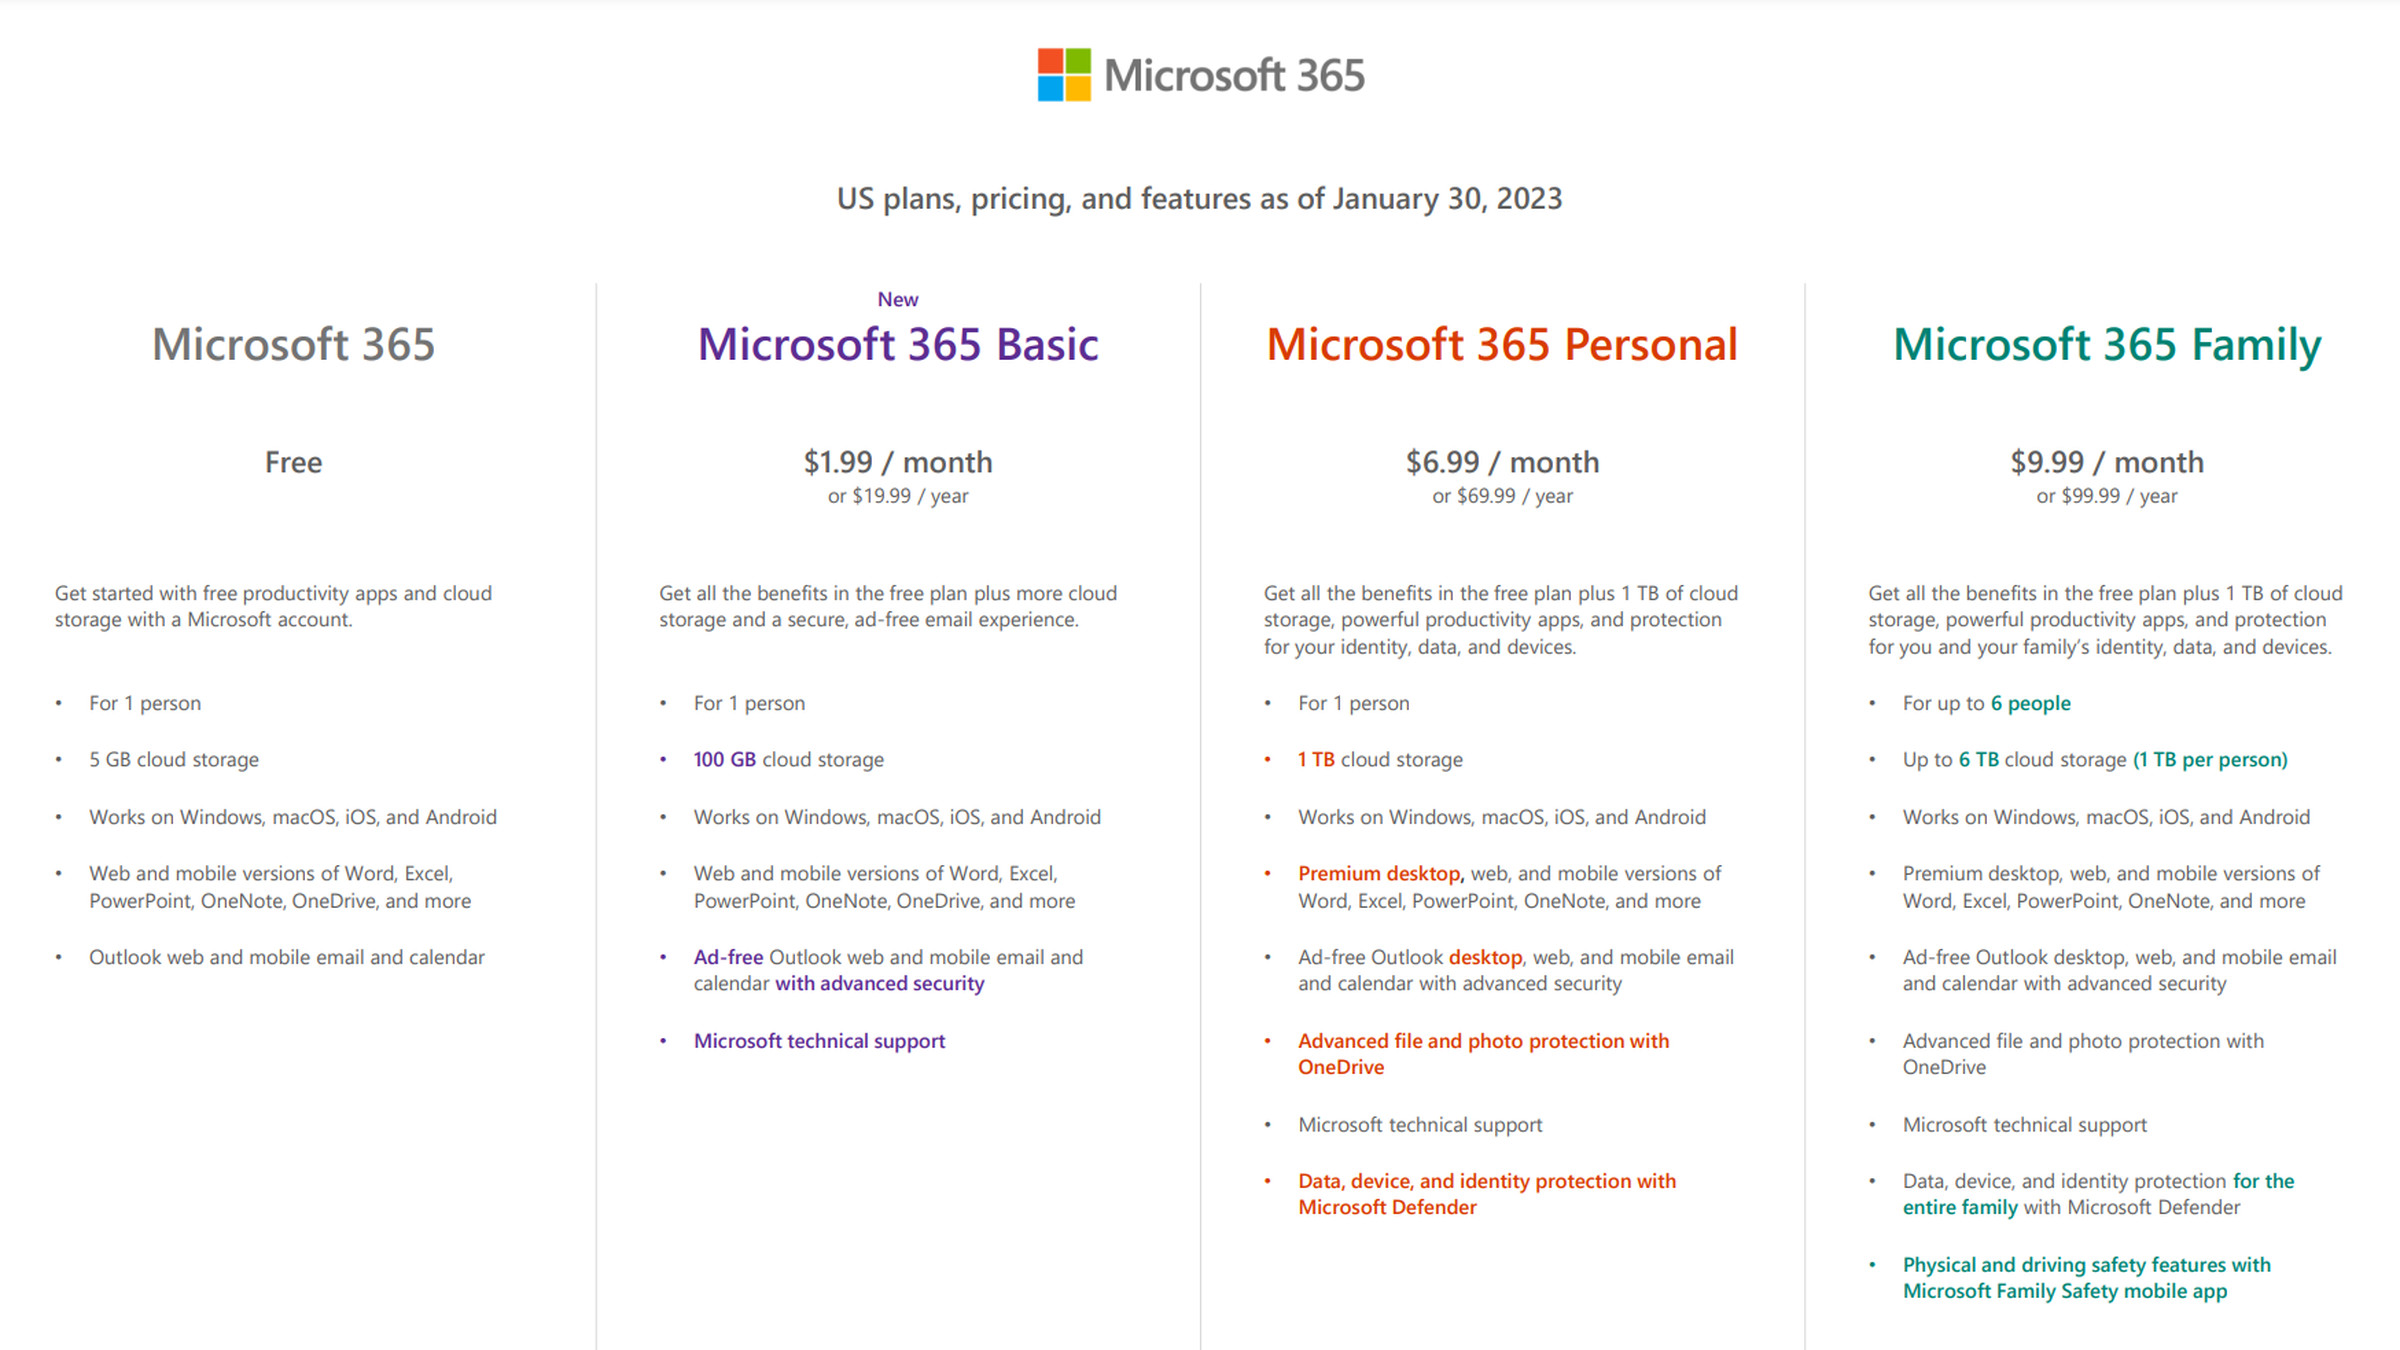 Microsoft 365 US plans and pricing